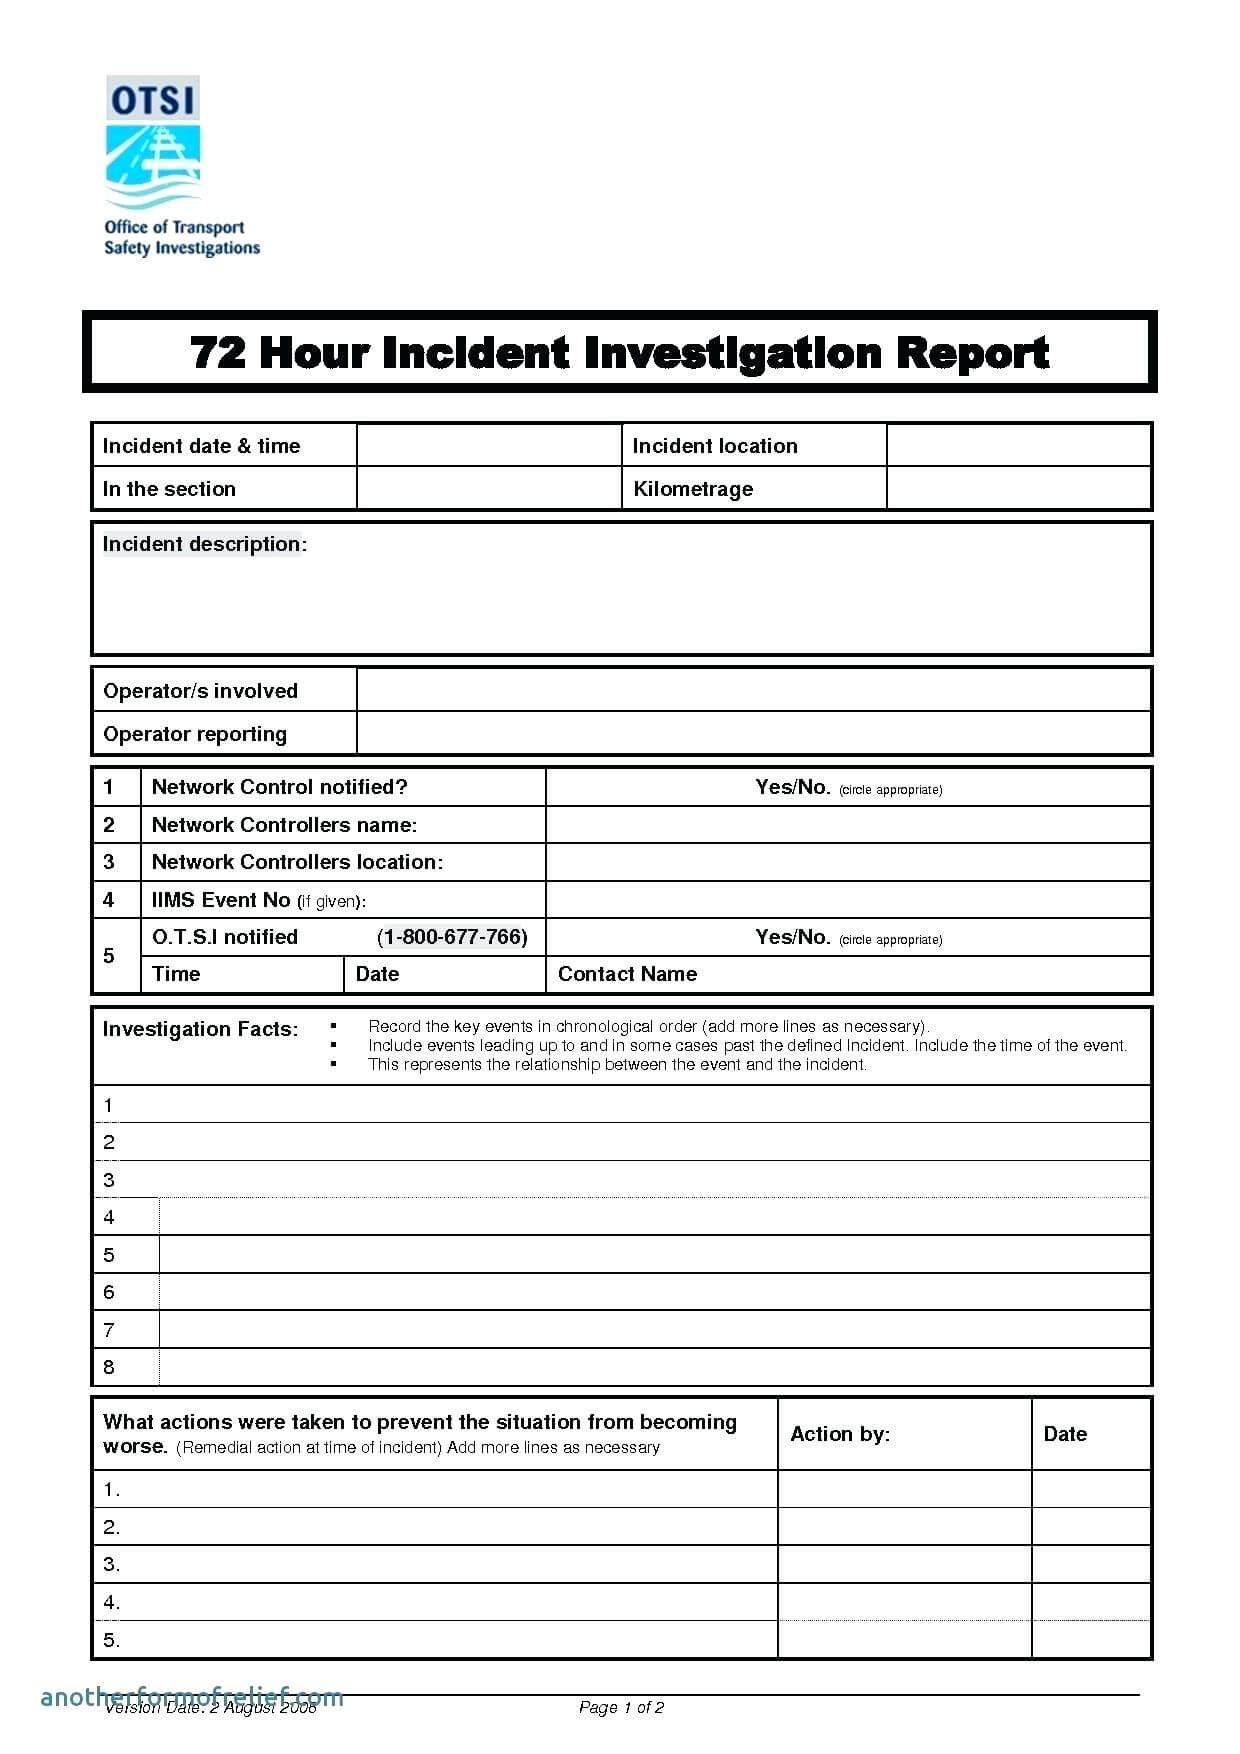 Crime Scene Report Sample 211805 Examples Images Of Template Within Crime Scene Report Template